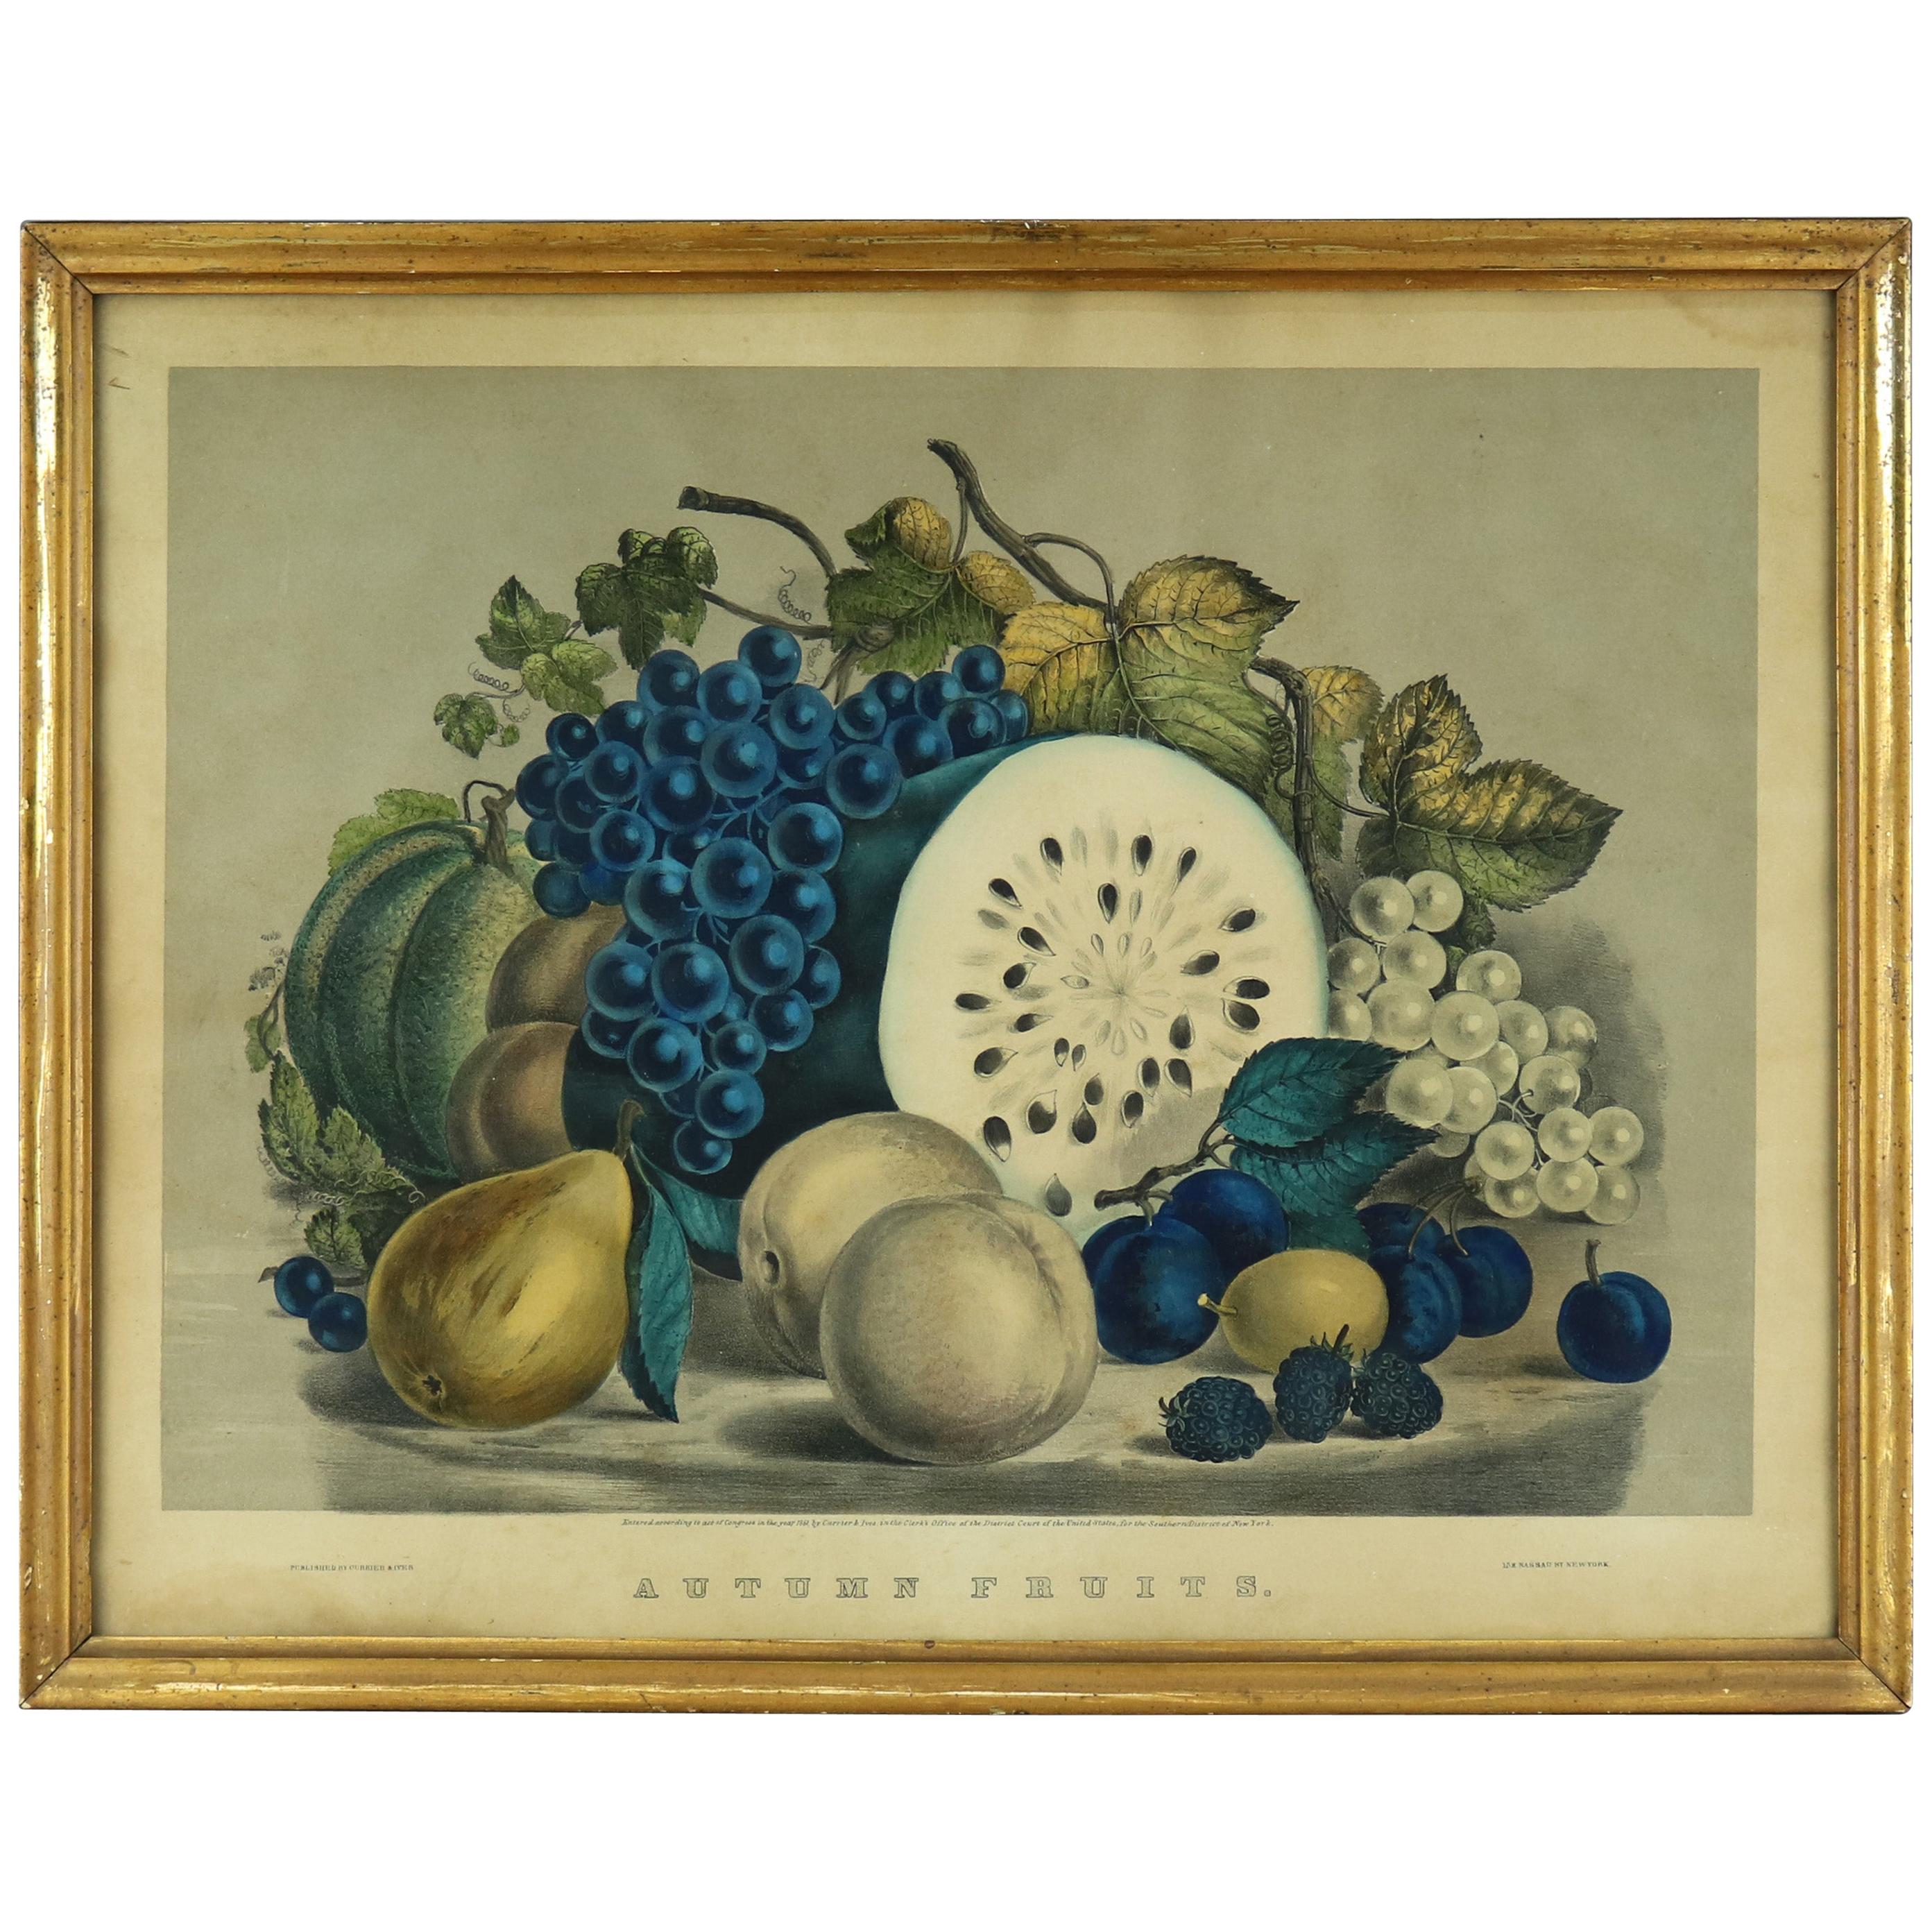 Antique Currier & Ives Still Life Lithograph in Gilt Frame, Autumn Fruits